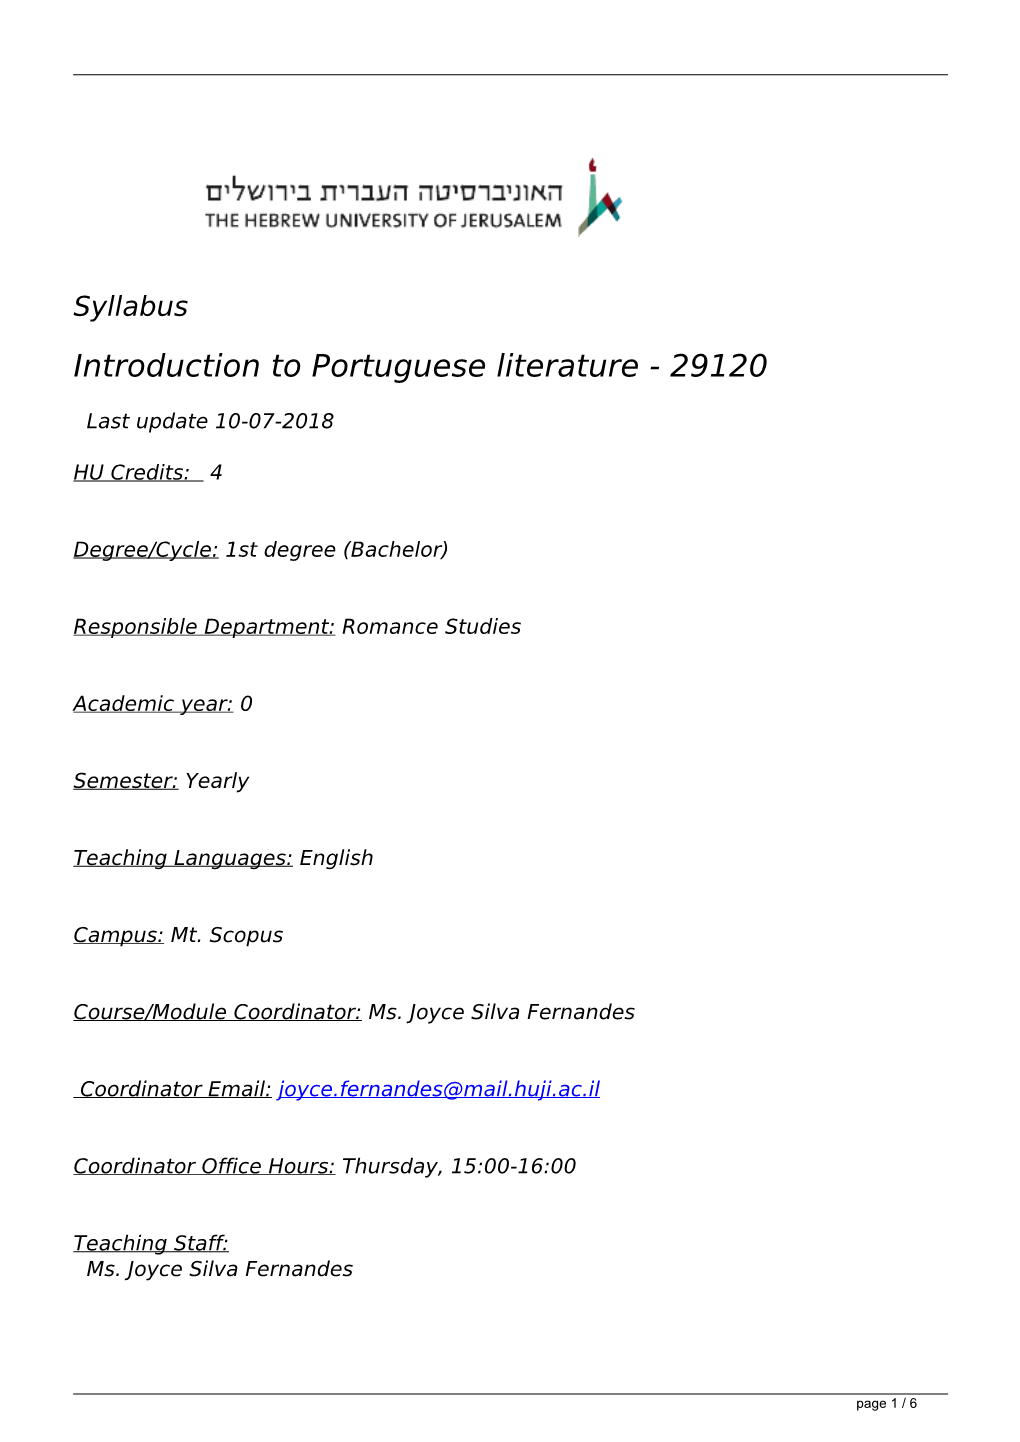 Introduction to Portuguese Literature - 29120